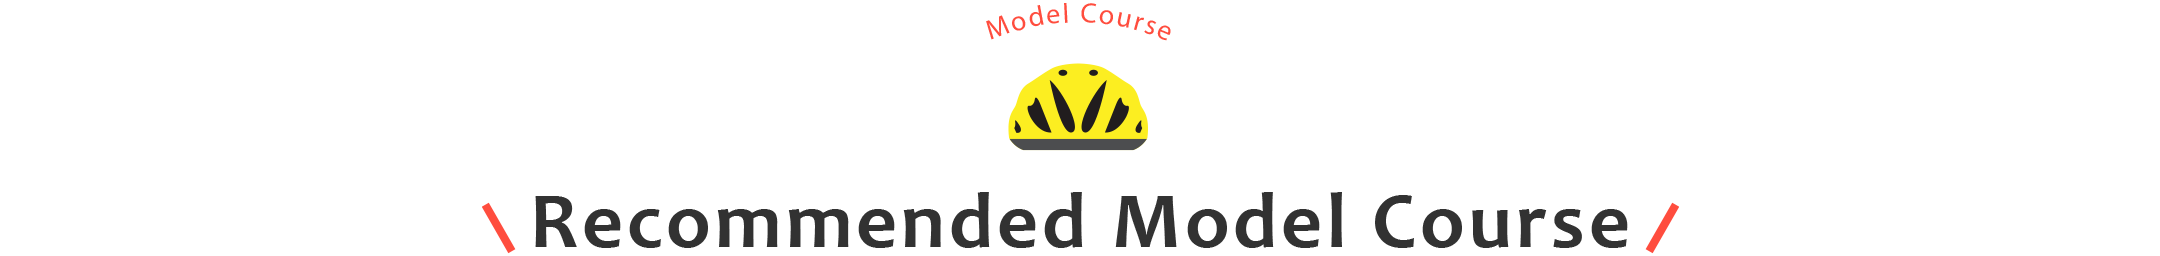 Recommended Model Course